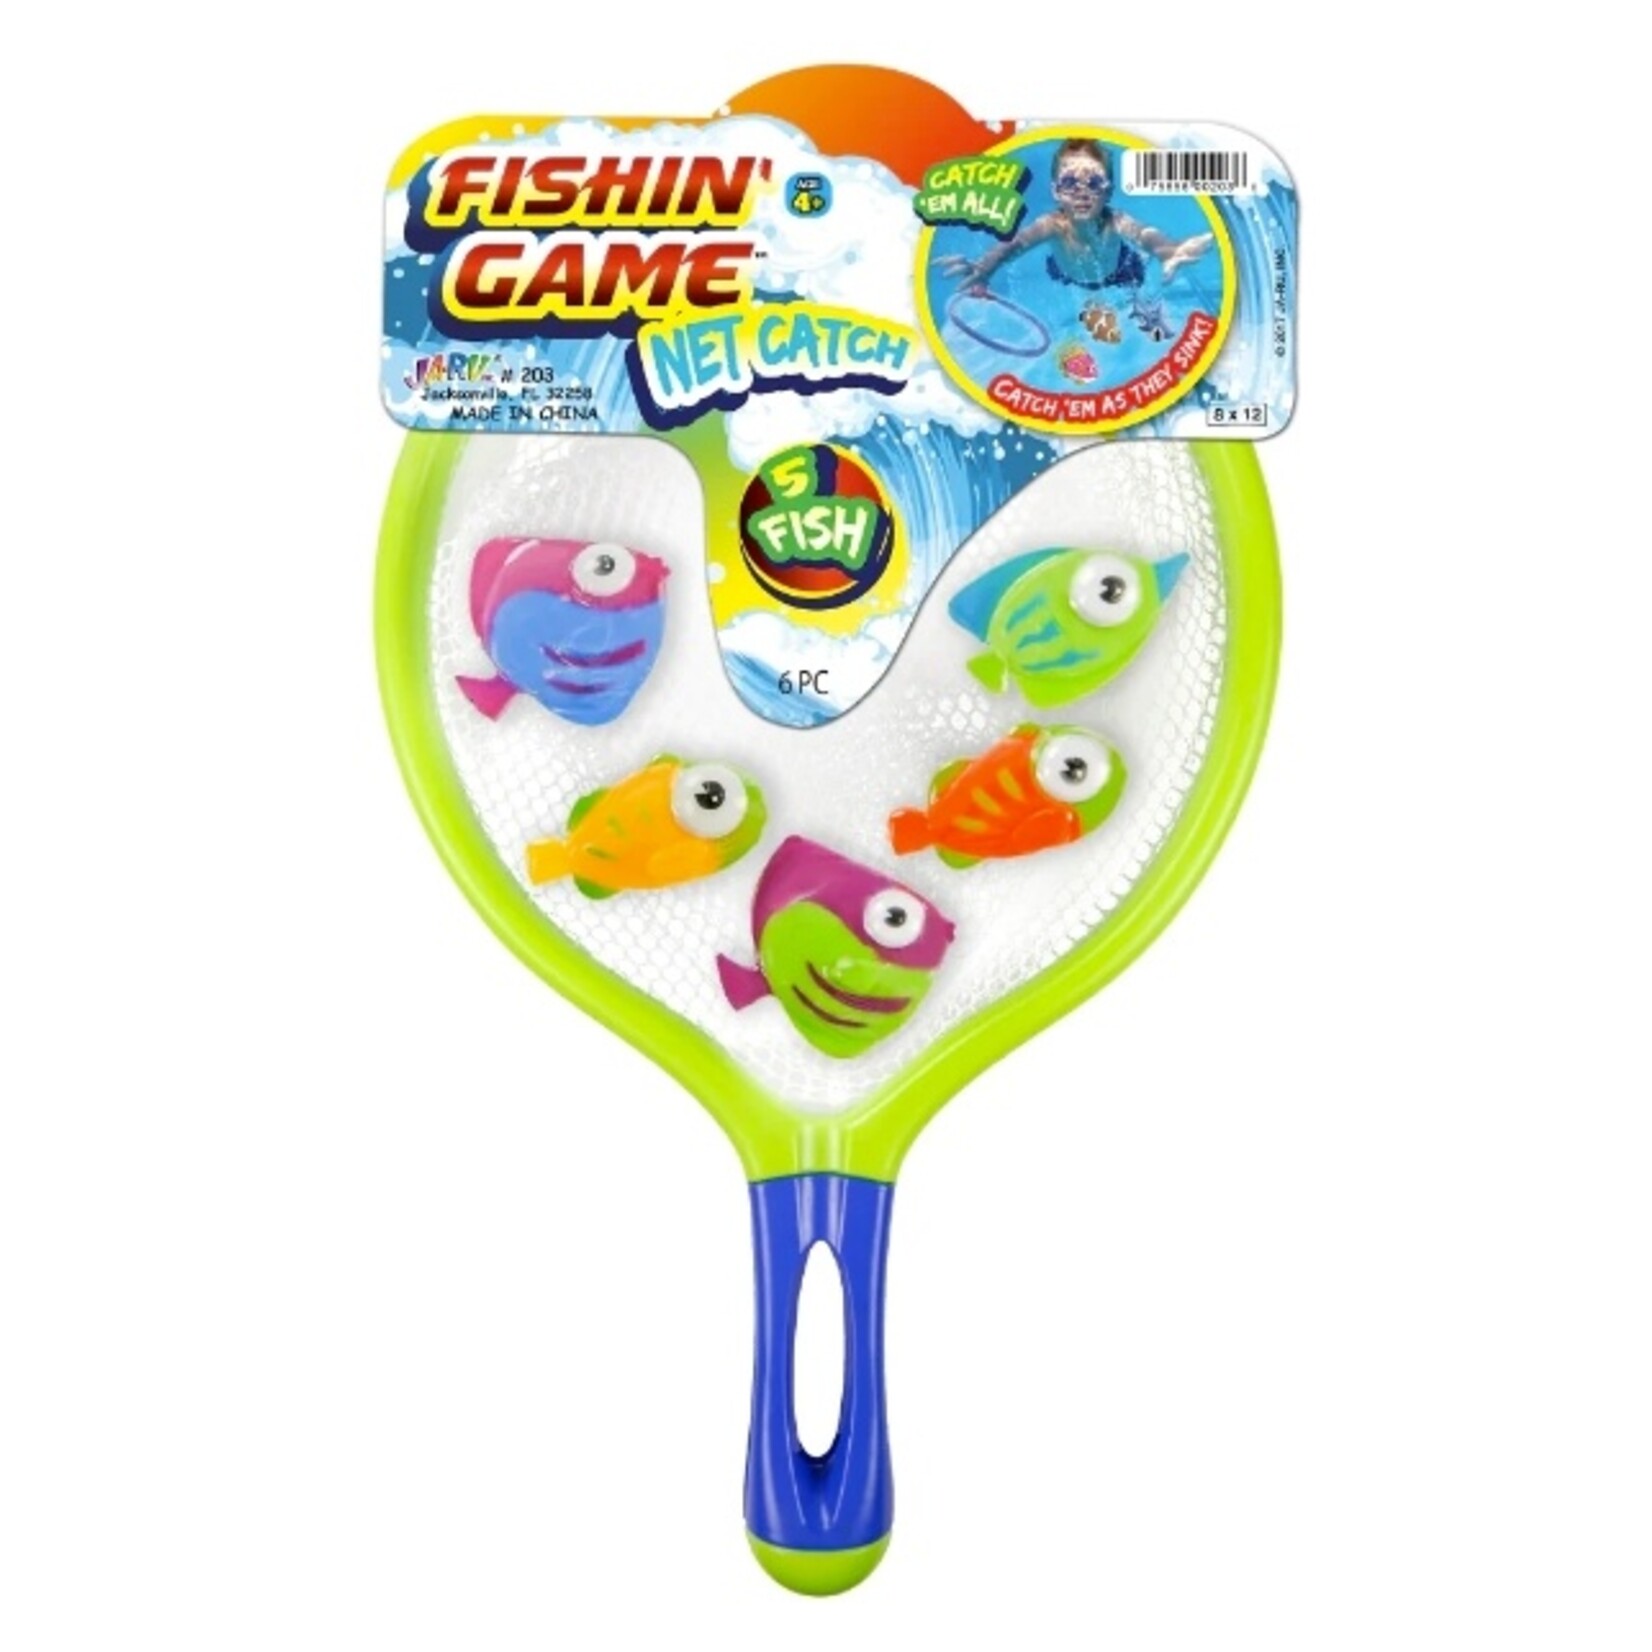 Wet Products Fishin' Game Catch Net